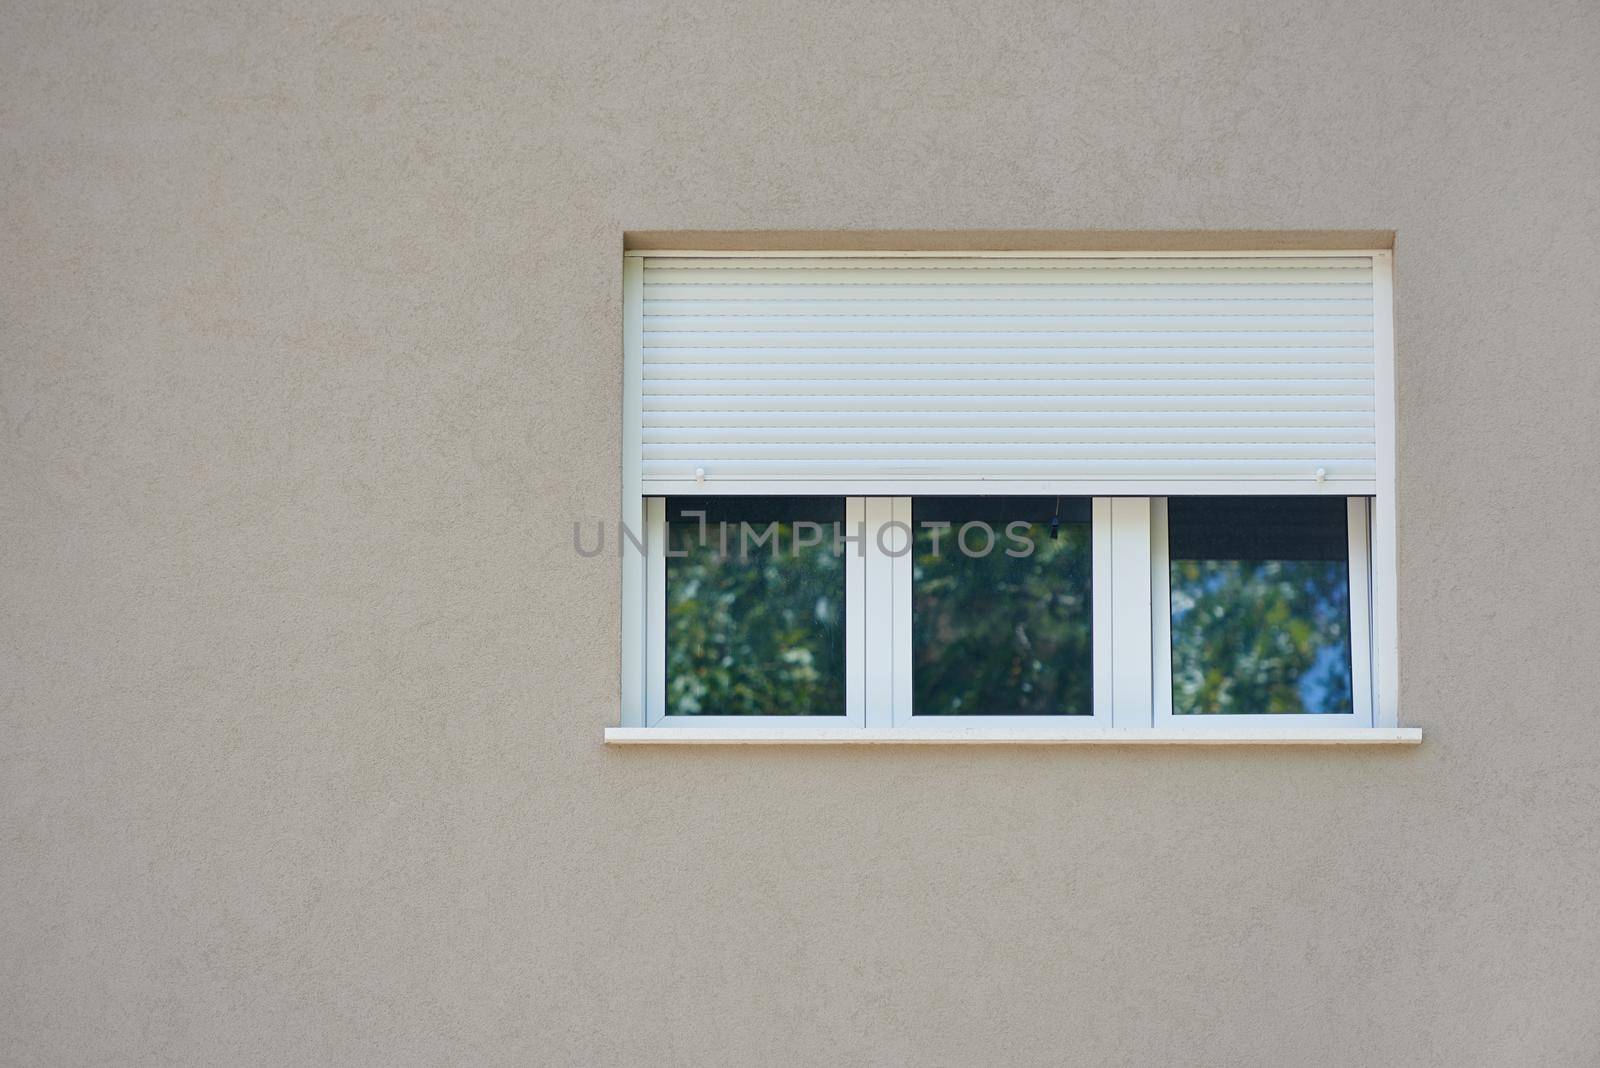 Roller shutter curtains mounted on a white window